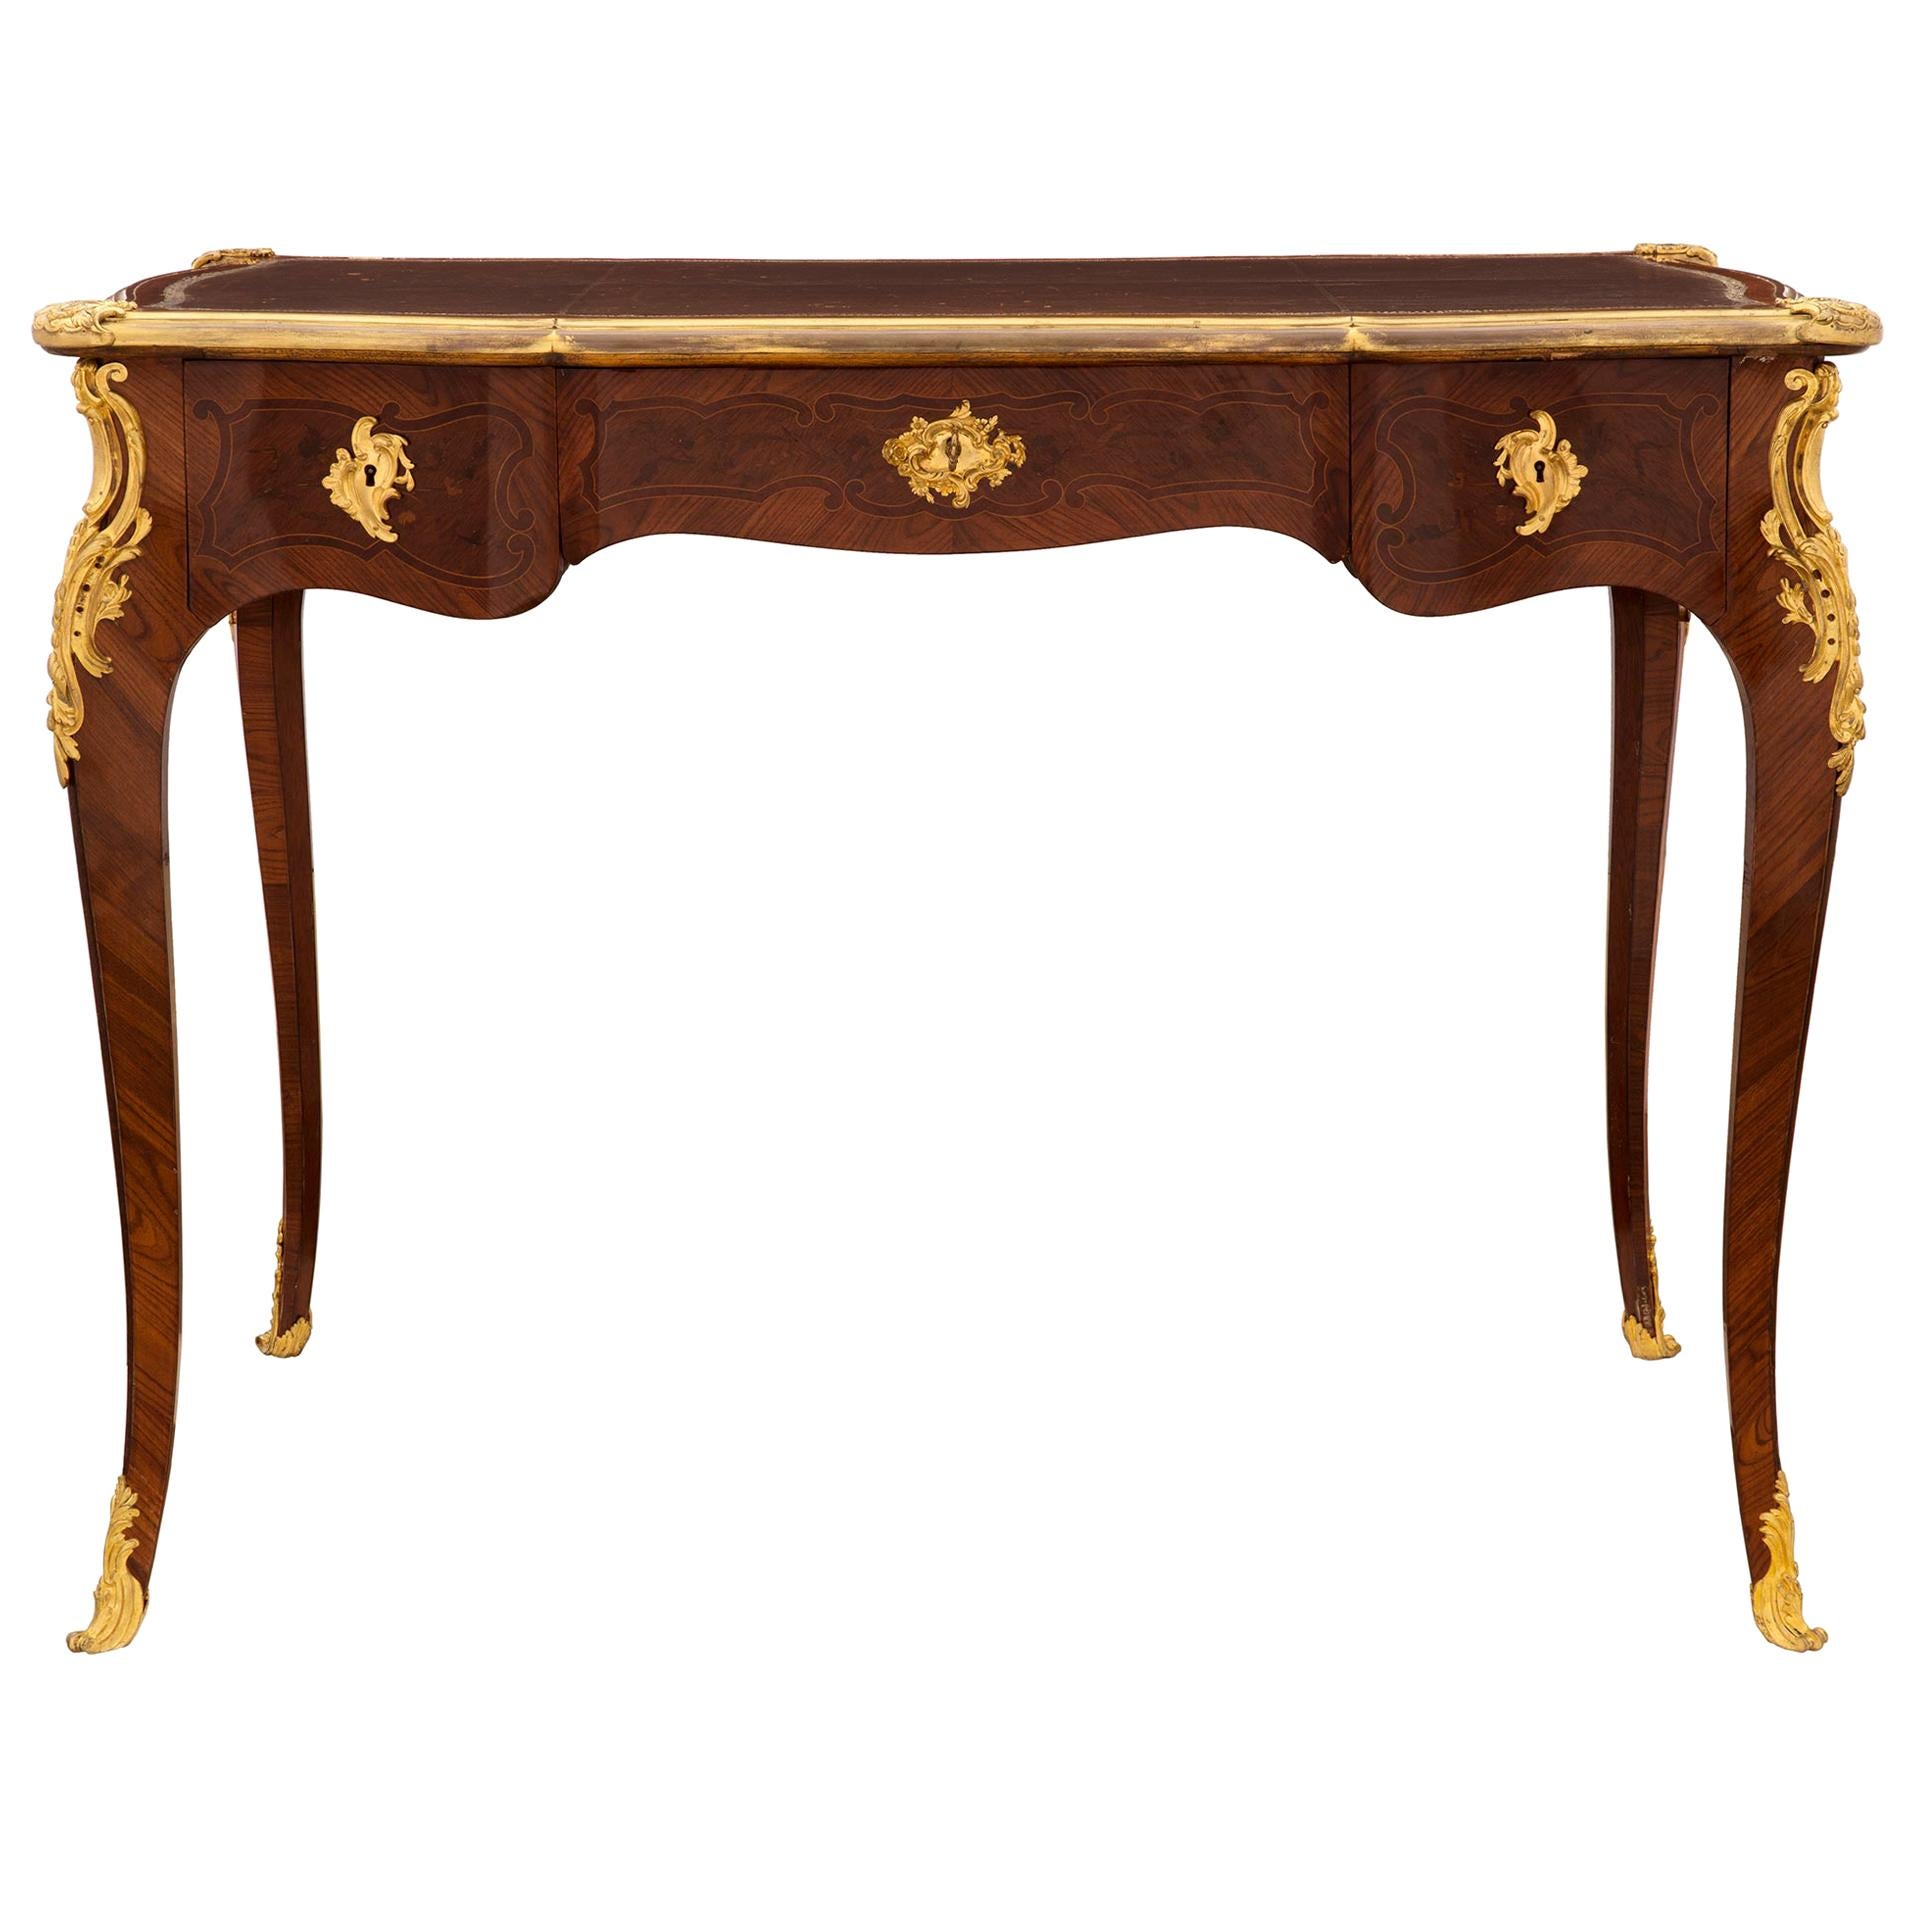 French 19th Century Louis XV Style Kingwood, Tulipwood, Ormolu and Leather Desk For Sale